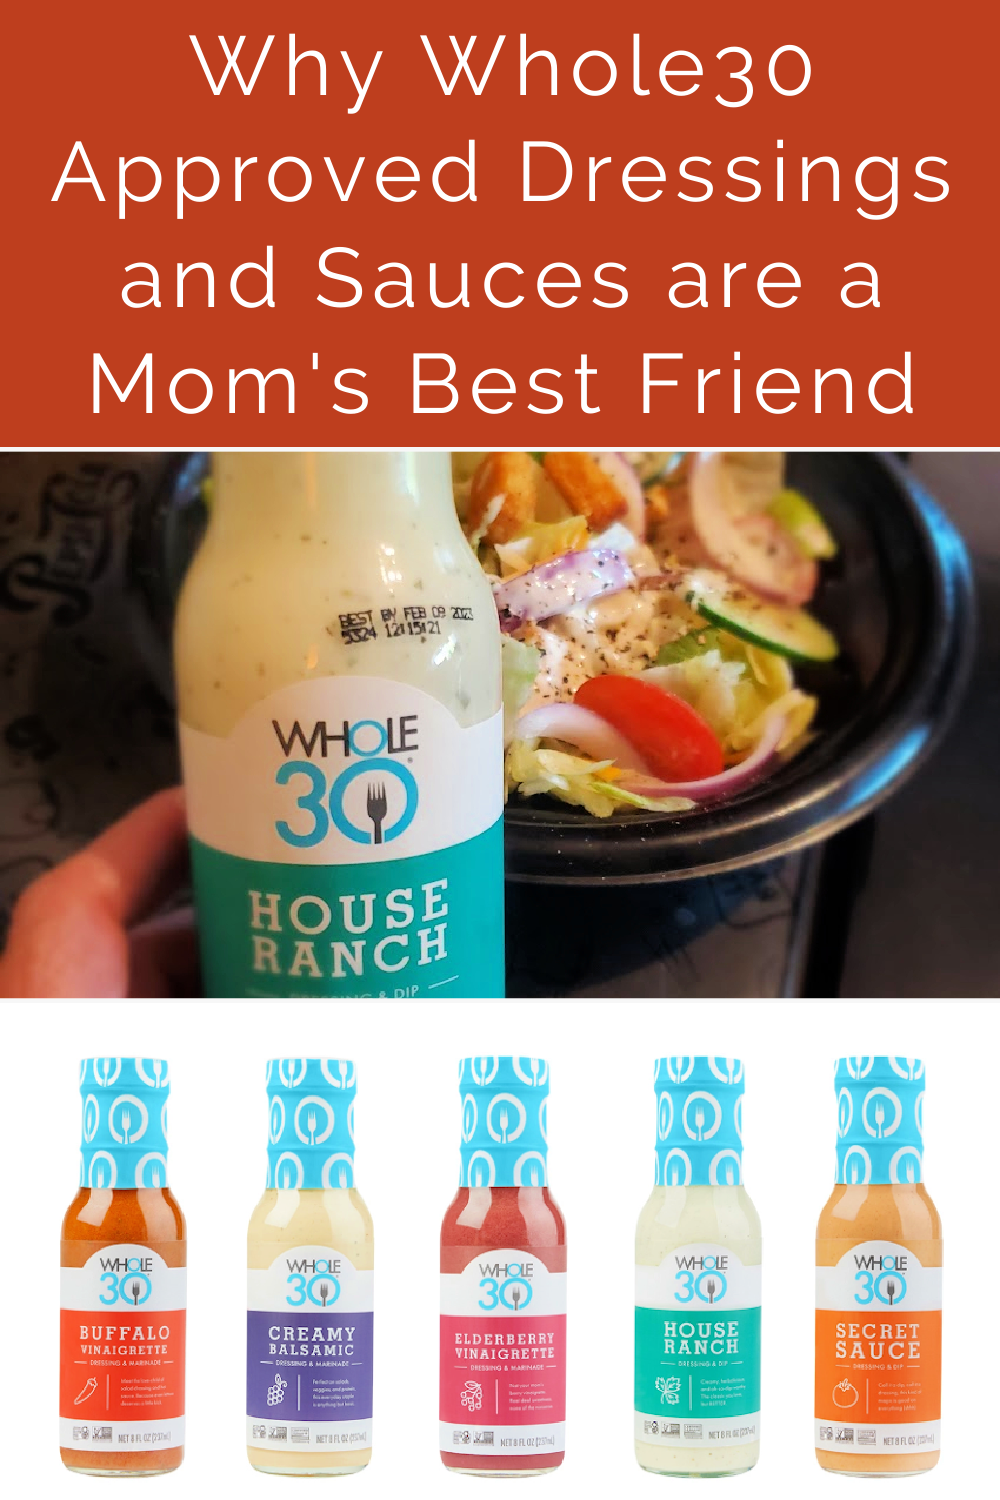 Why Whole30 Approved Dressings and Sauces are a Mom's Best Friend